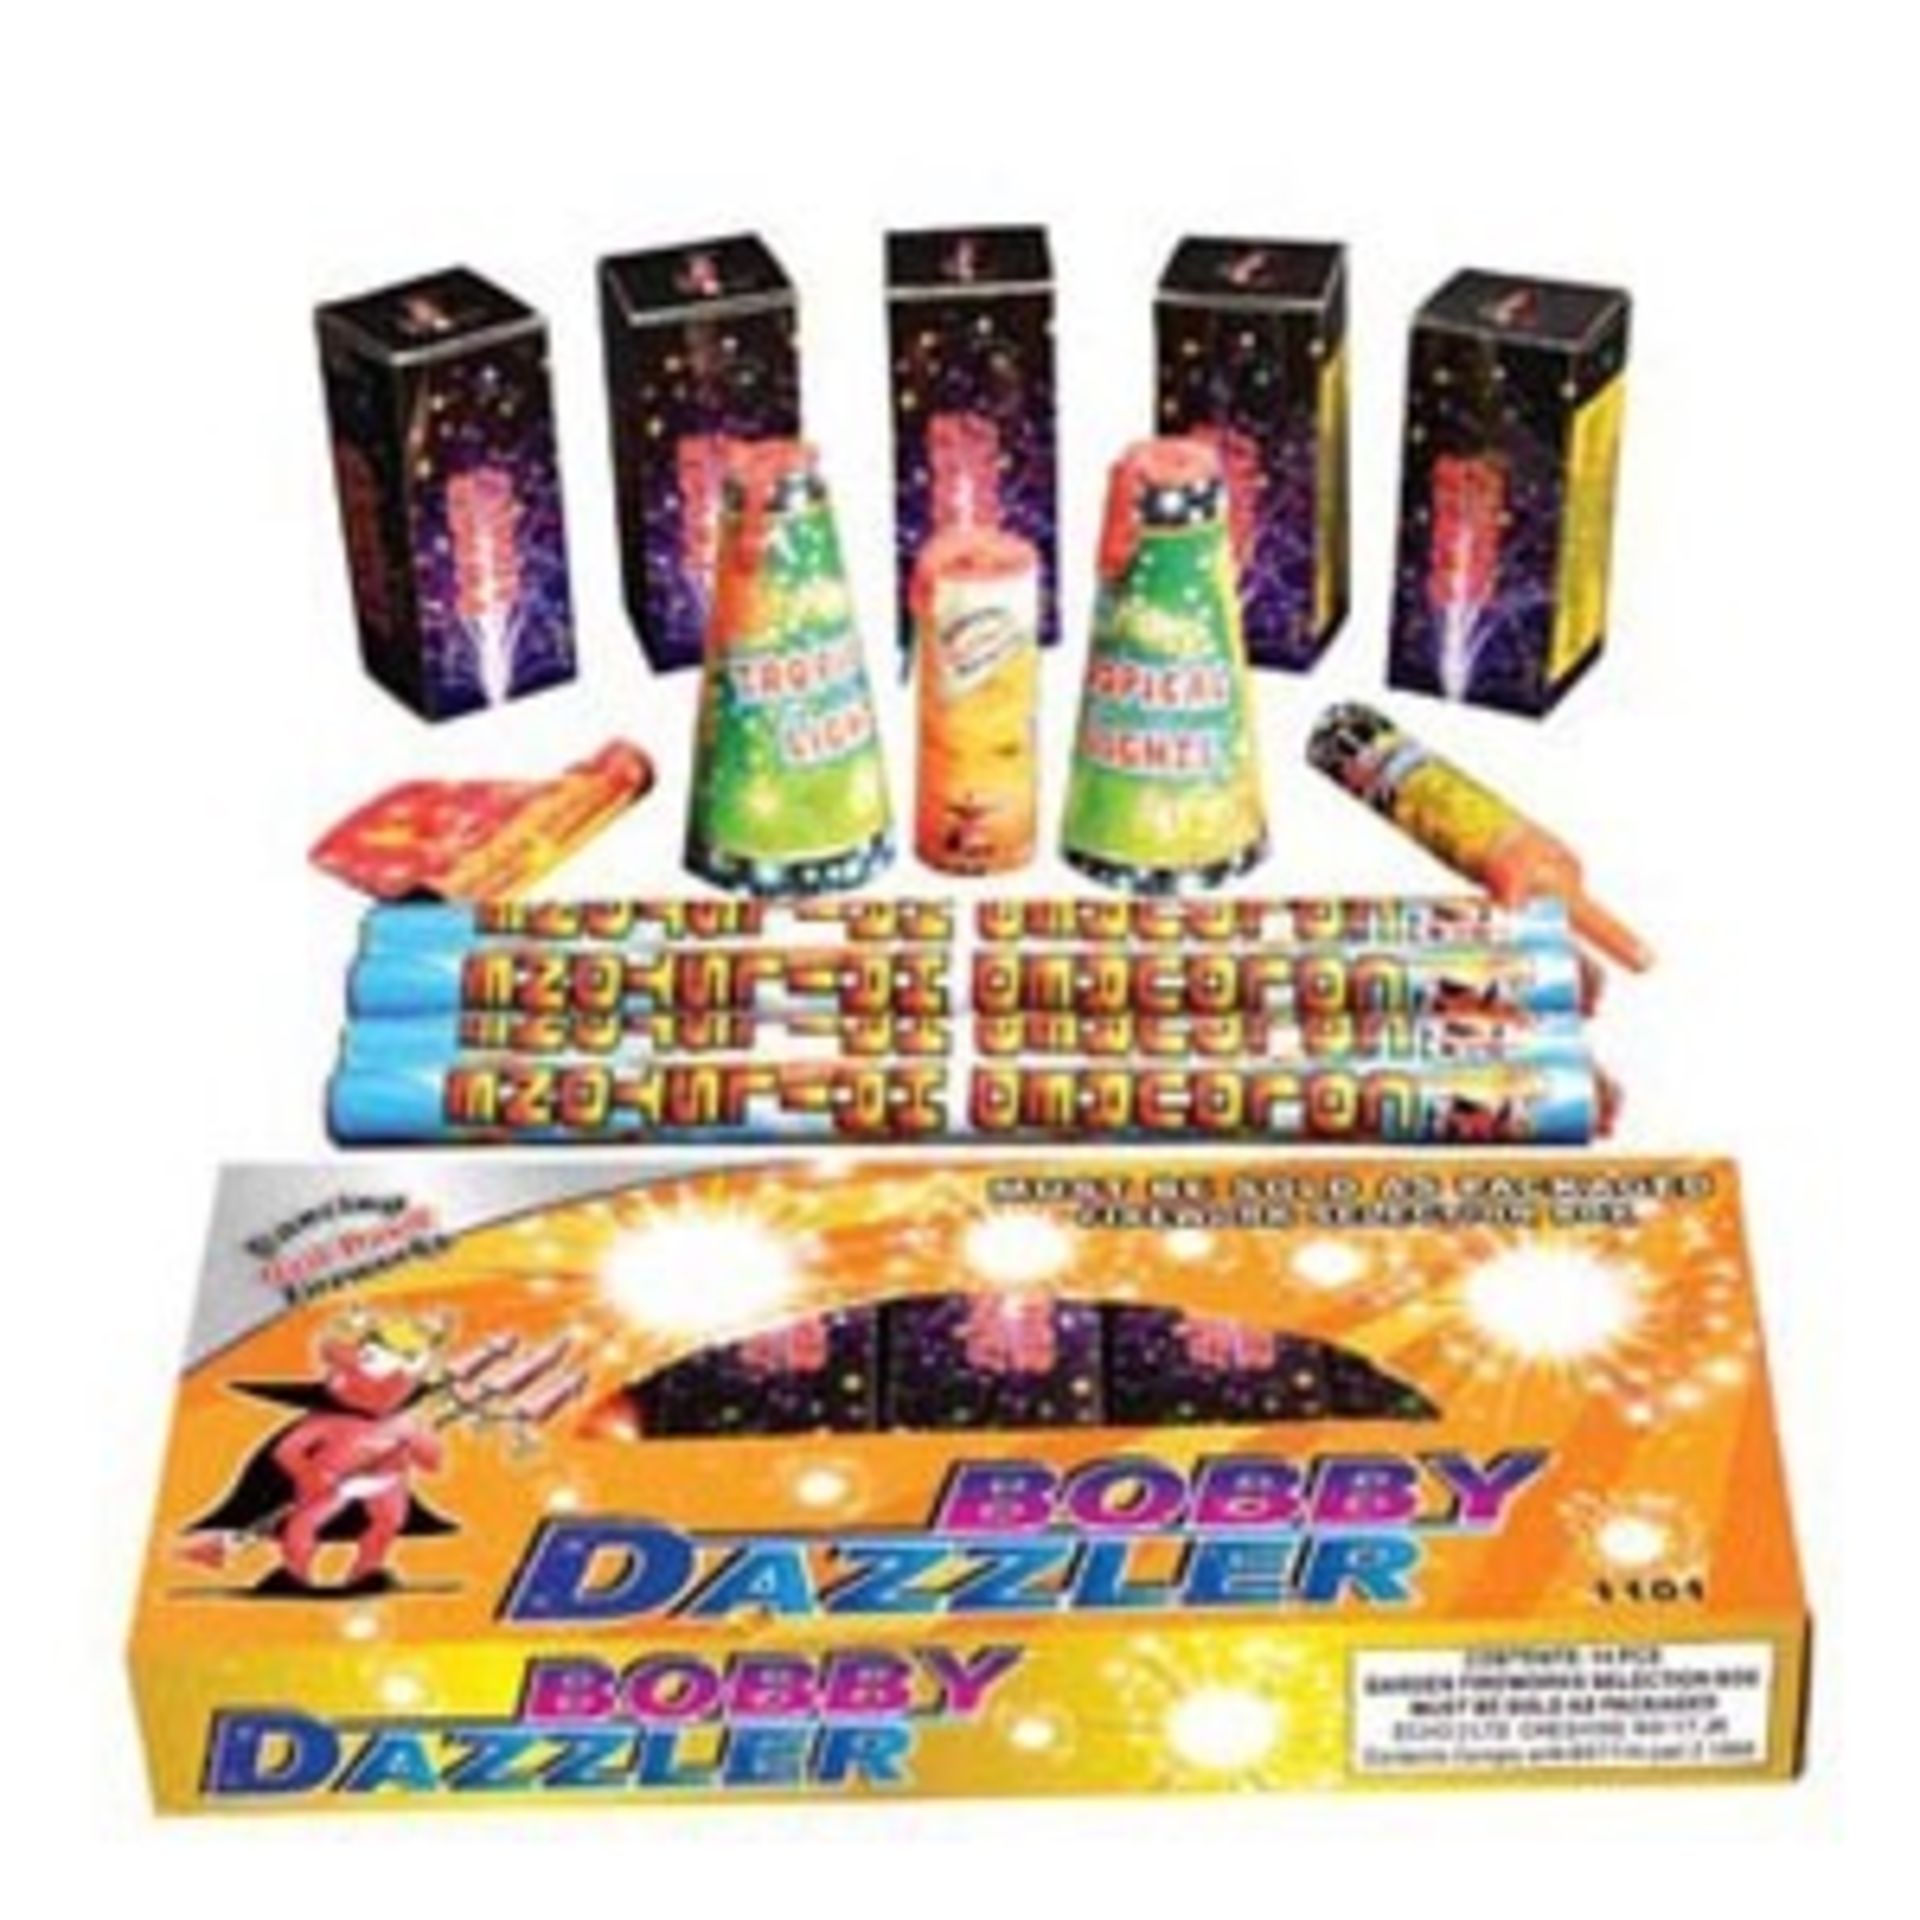 6 x Dancing Red Devil Fireworks - Bobby Dazzler 14 Piece Selection Boxes. Please note: NO DELIVERY